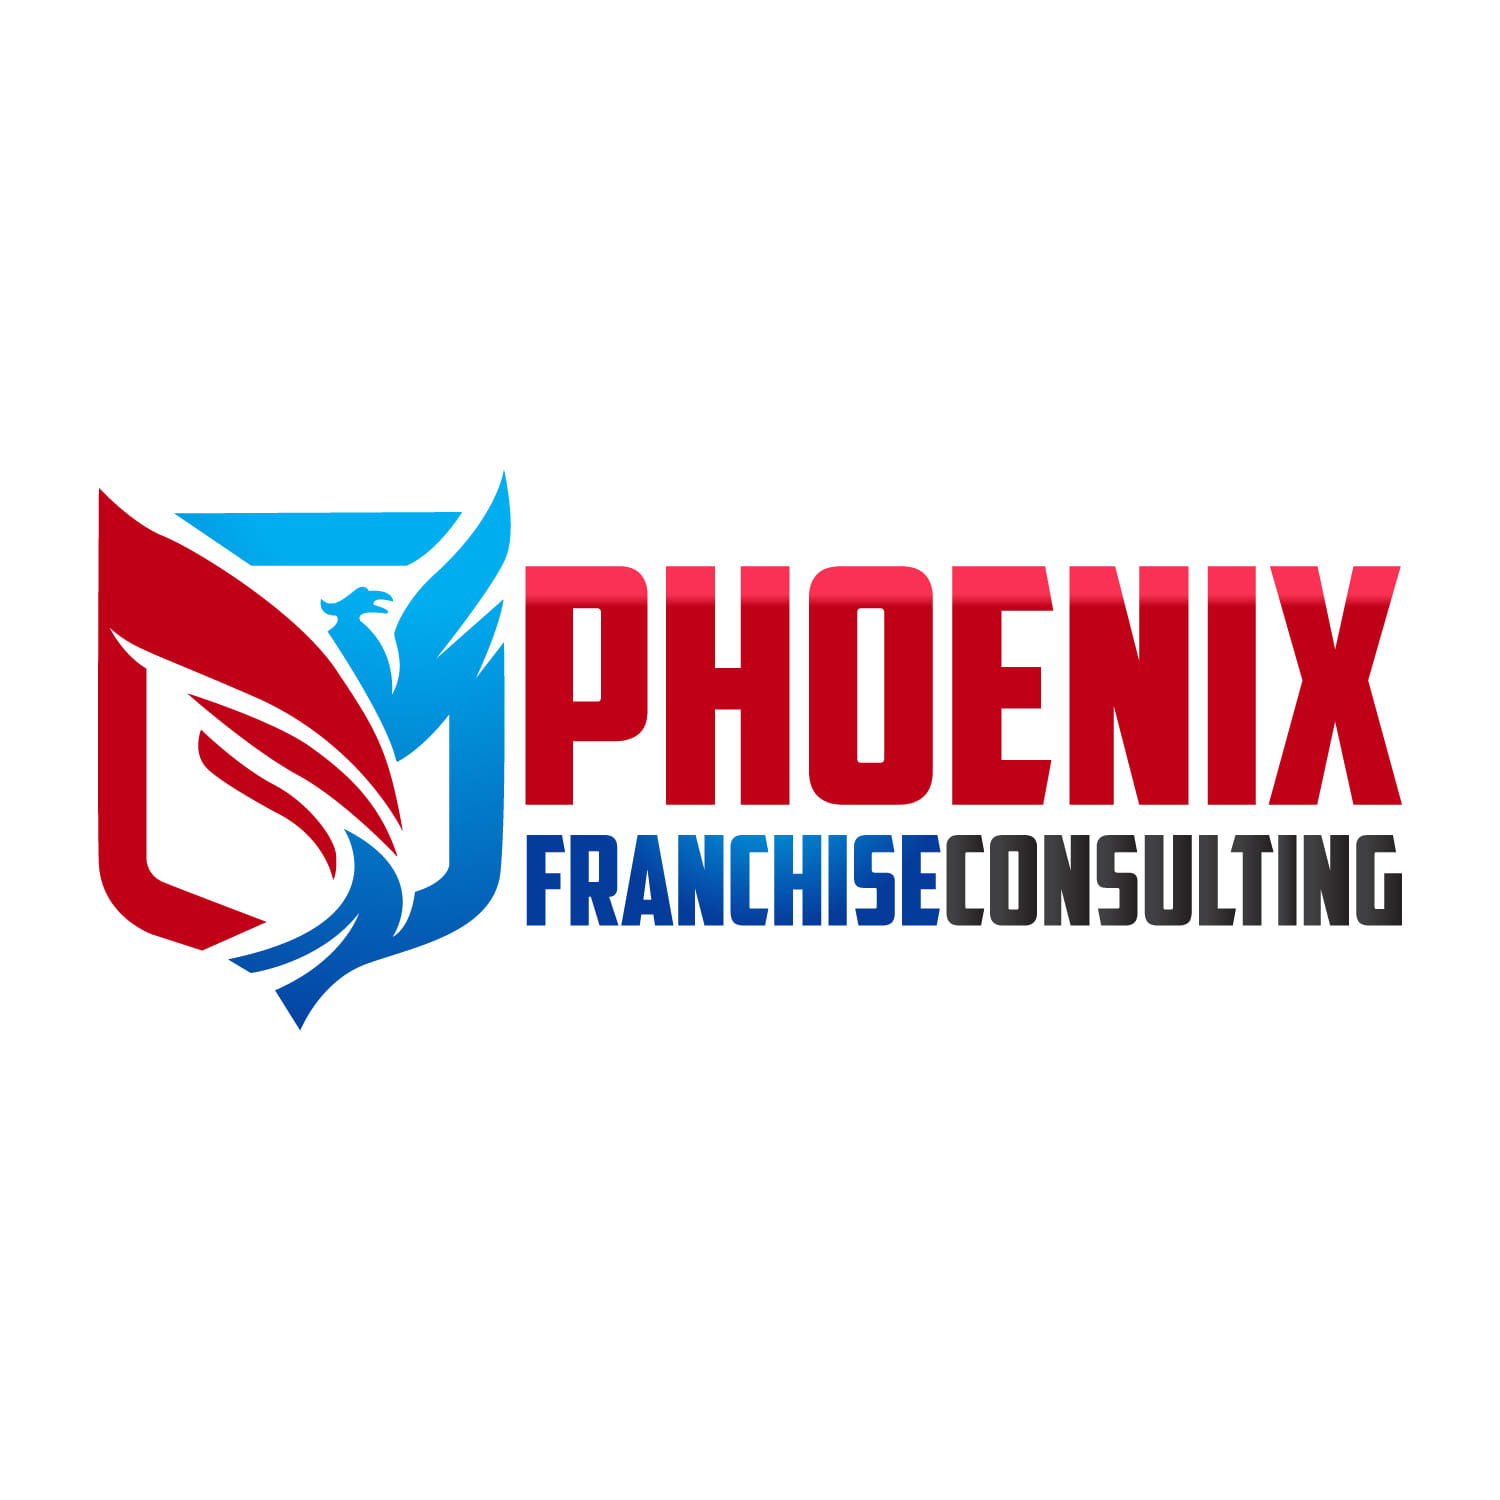 Phoenix Franchise Consulting